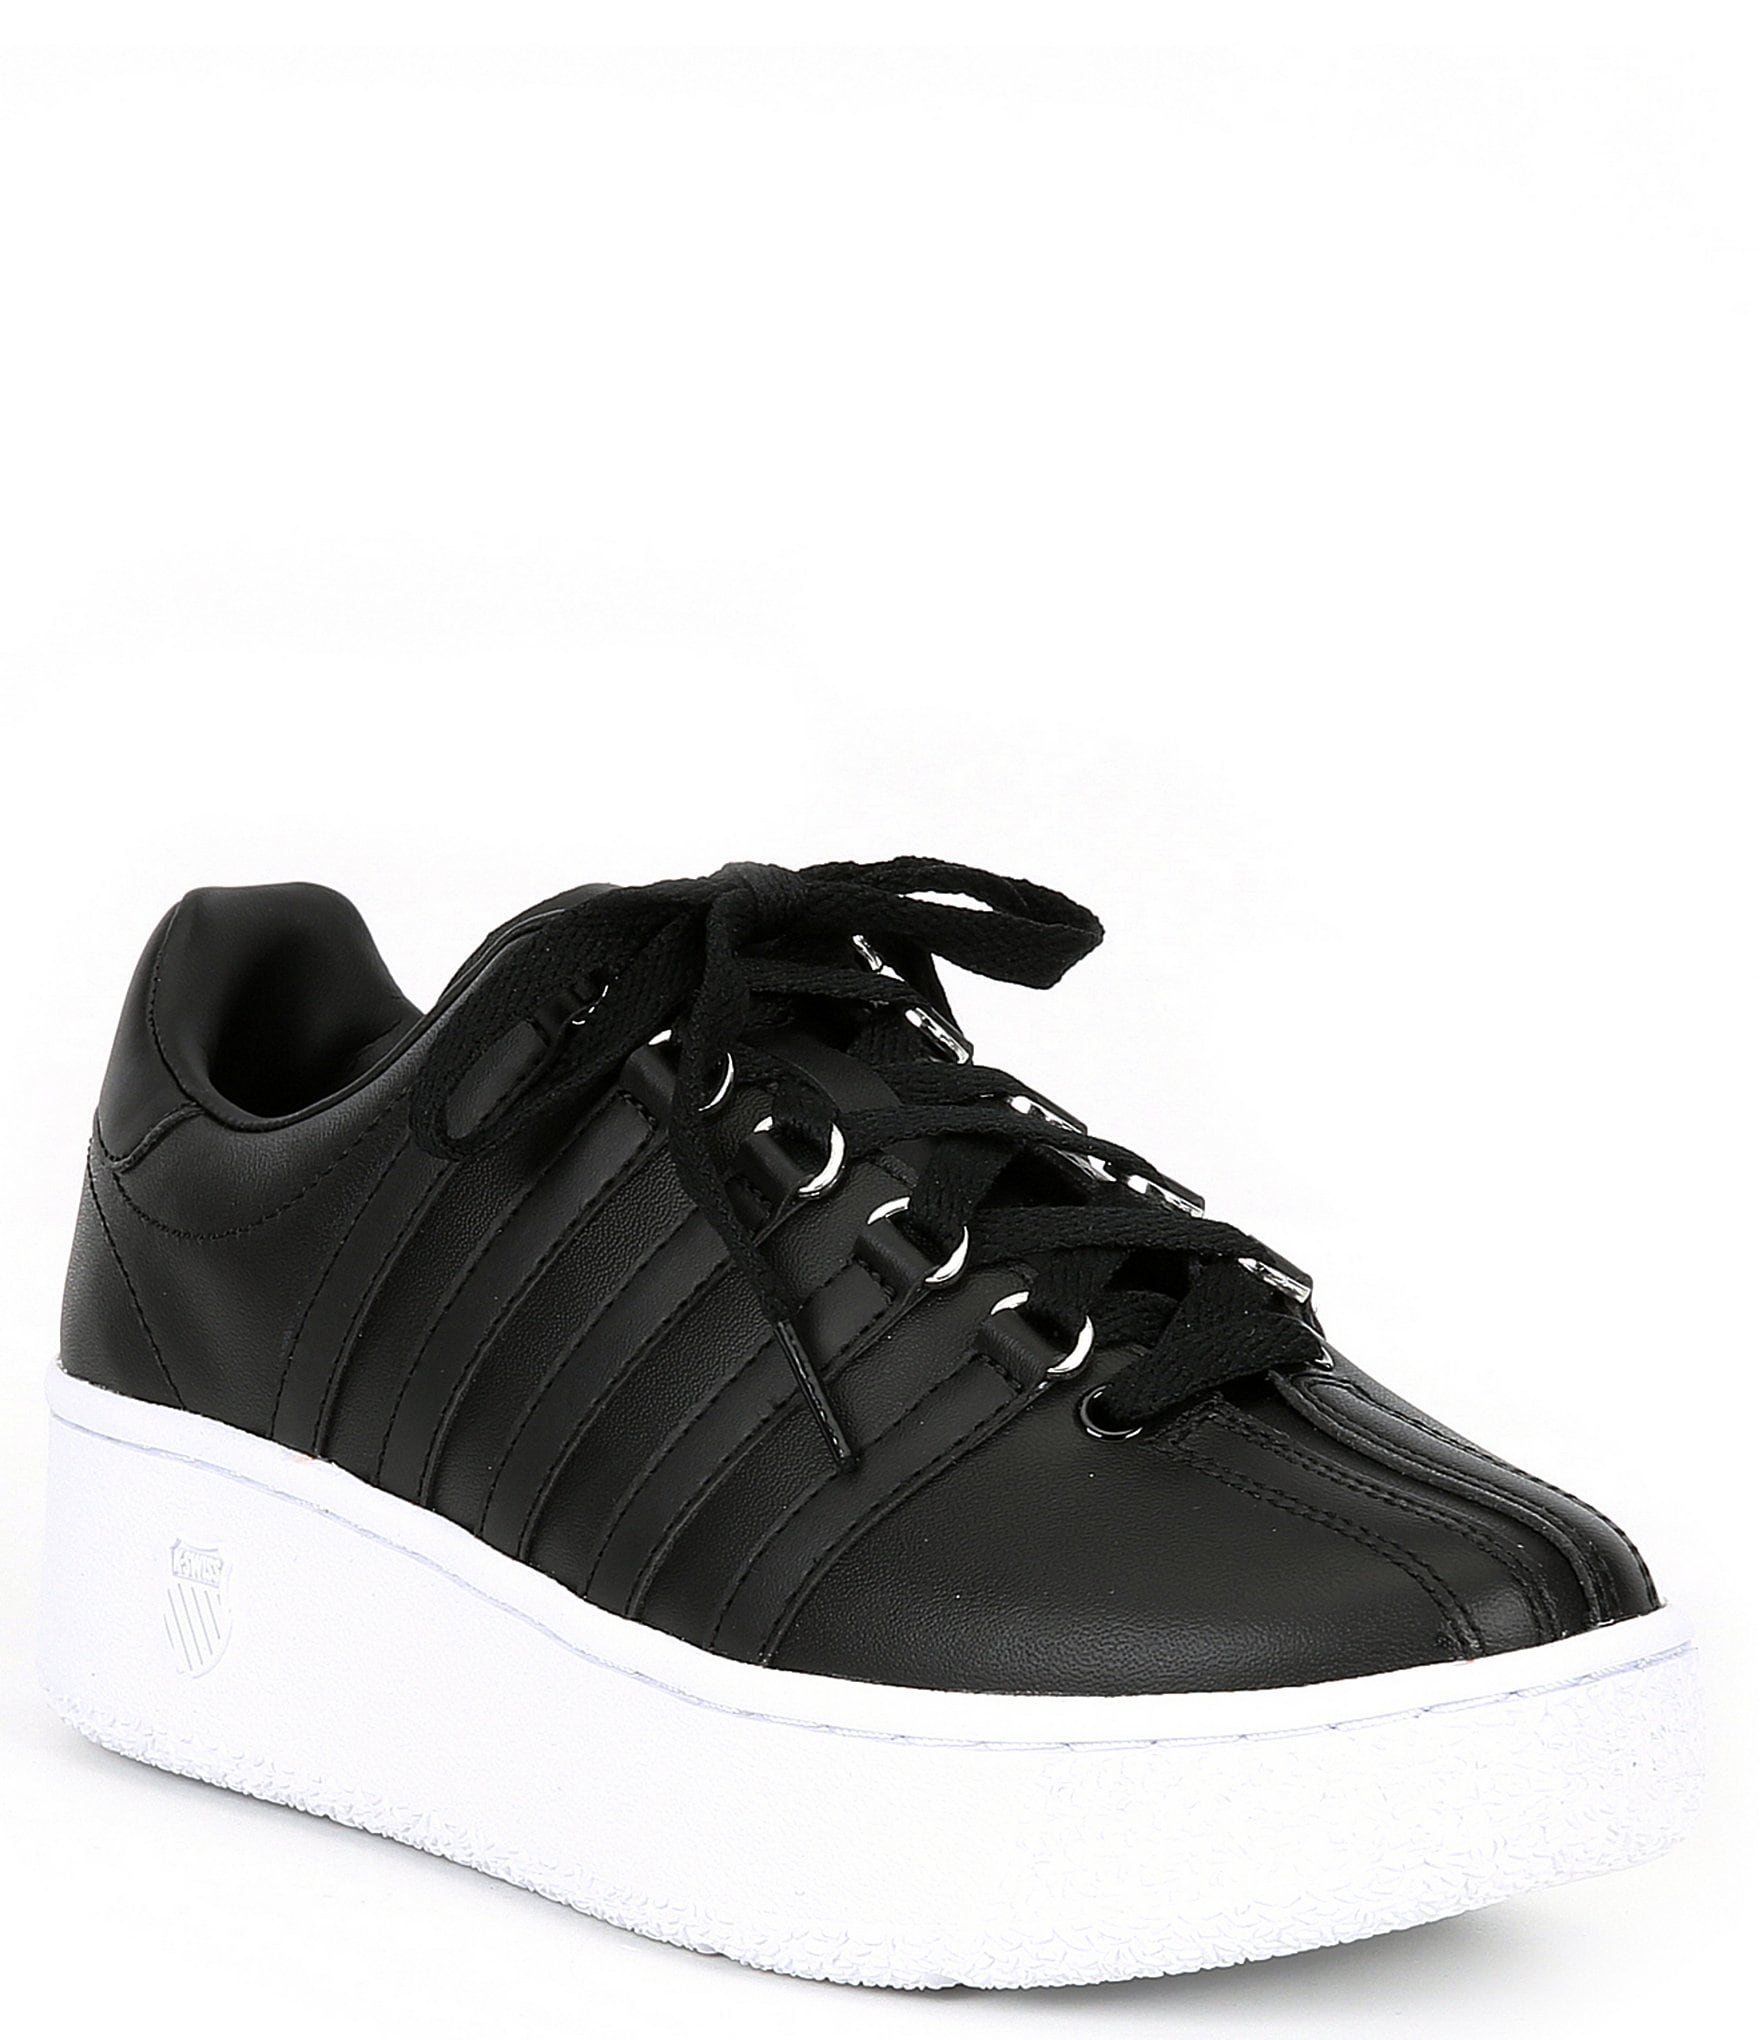 black-white: Women's Sneakers & Athletic Shoes